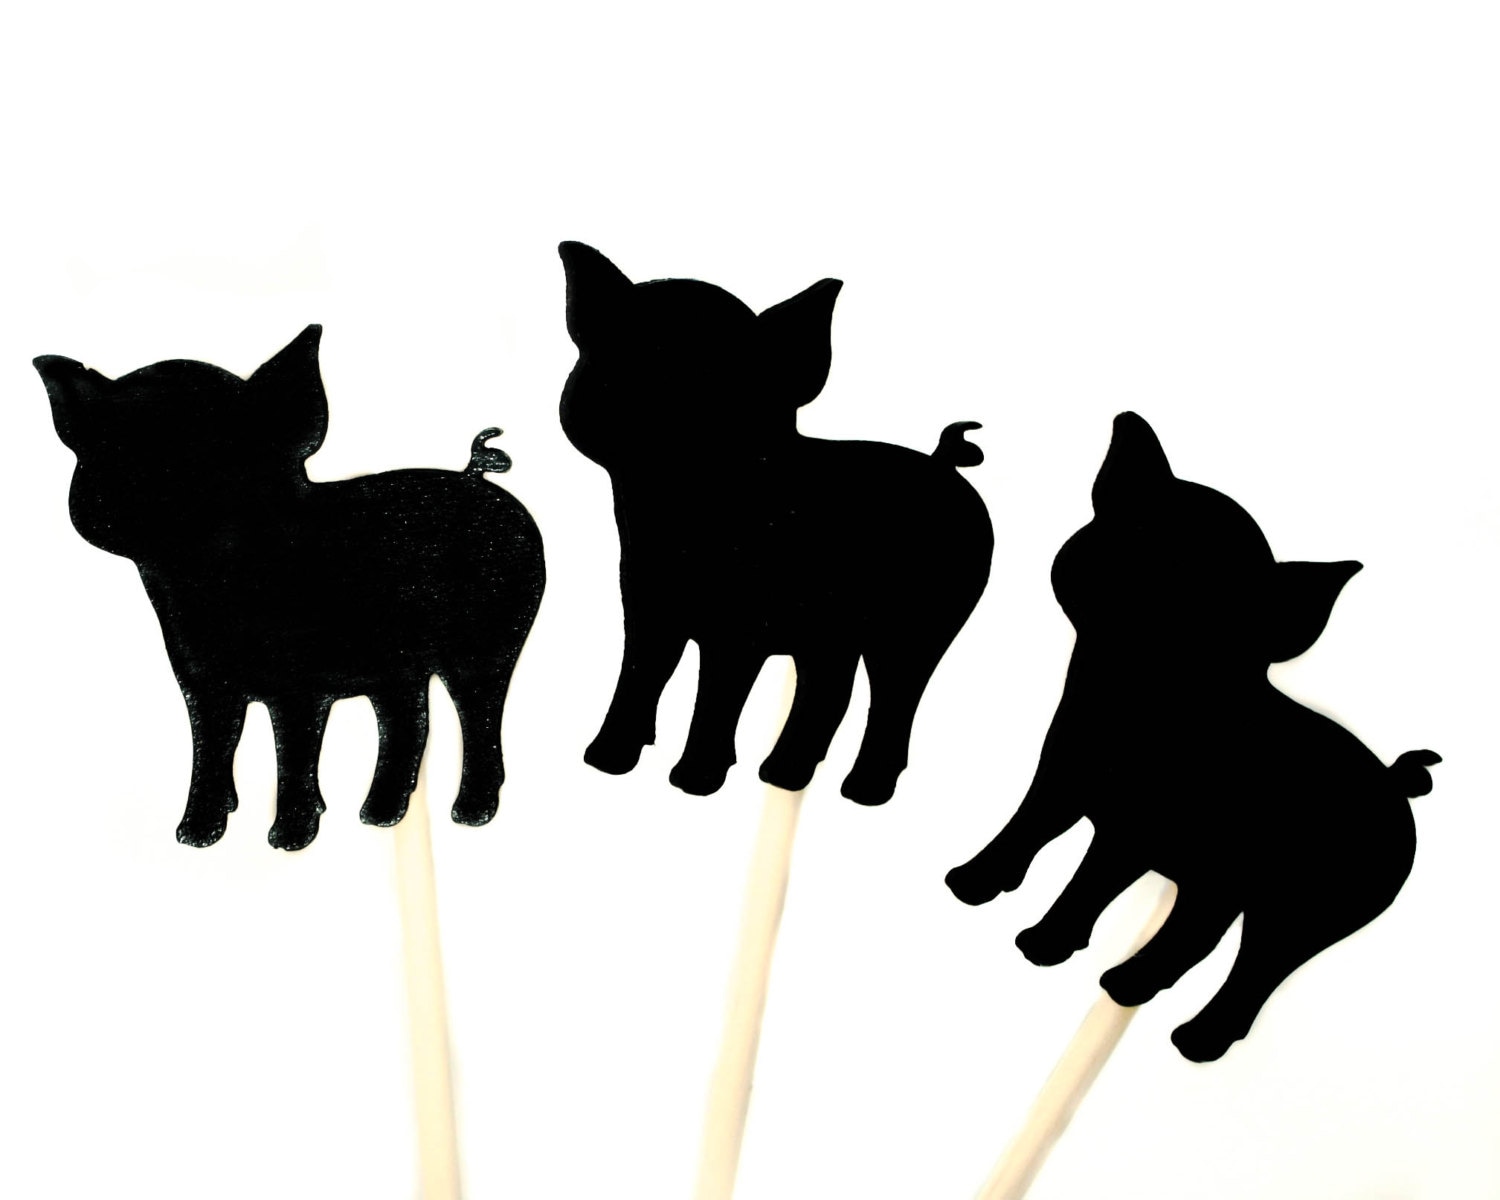 three-little-pigs-and-big-bad-wolf-shadow-puppets-wooden